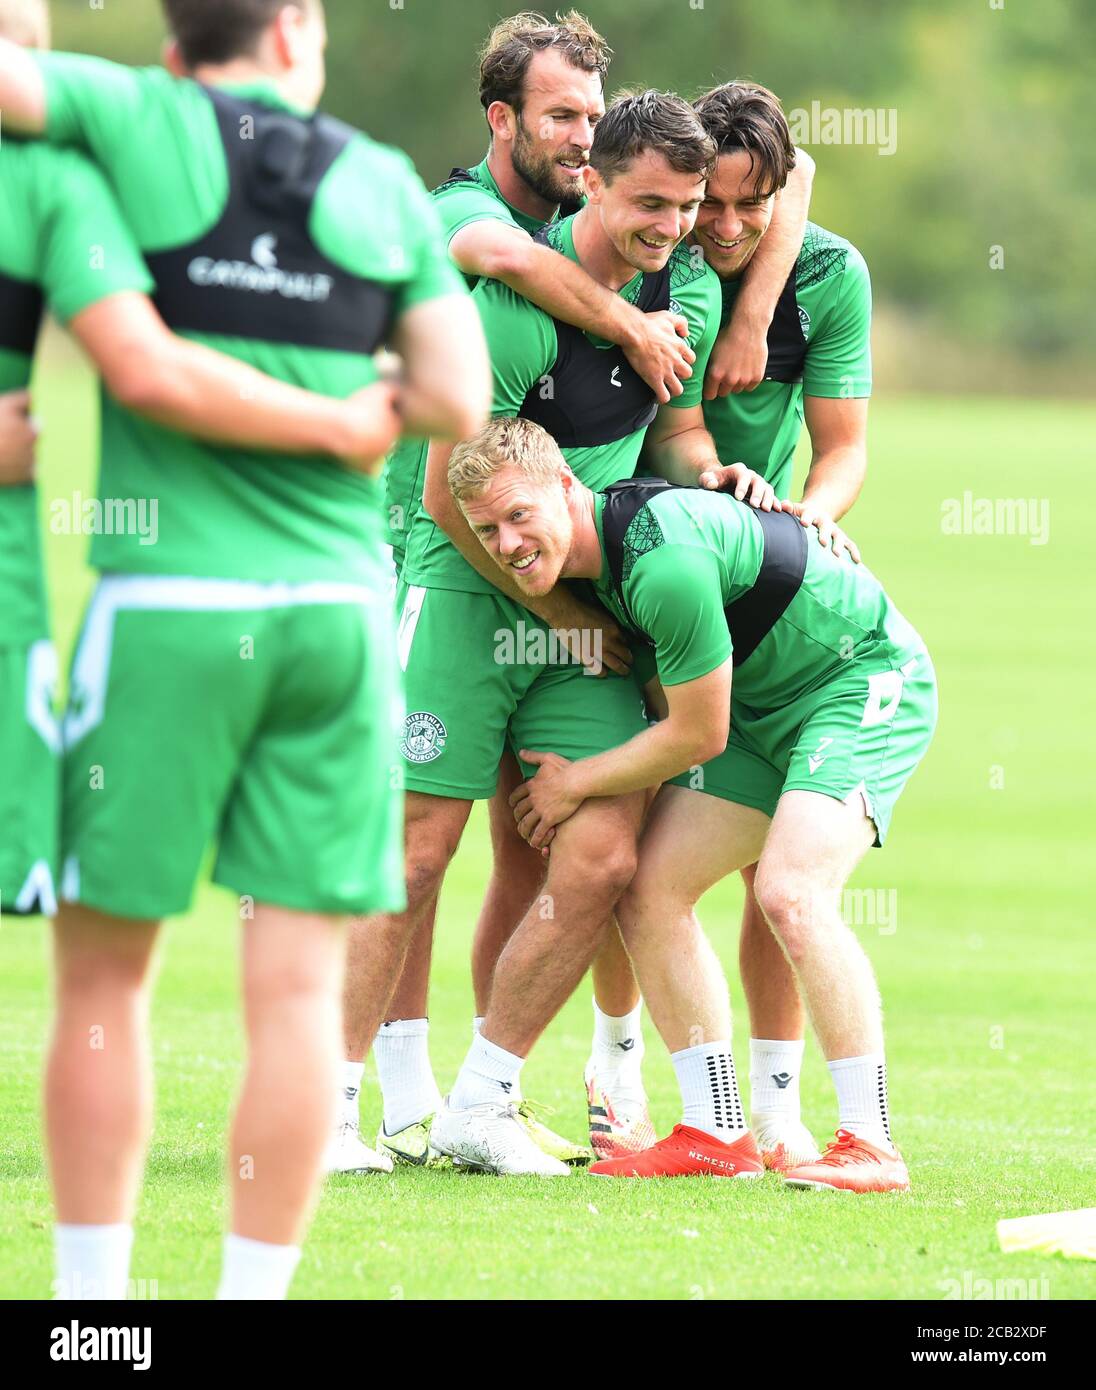 Tranent, Ormiston, East Lothian.Scotland. UK 10th Aug 20. Hibernian Daryl Horgan (bottom ) Training Session with Stephen McGinn (The ex St Mirren player on the look out for new club ) Credit: eric mccowat/Alamy Live News Stock Photo